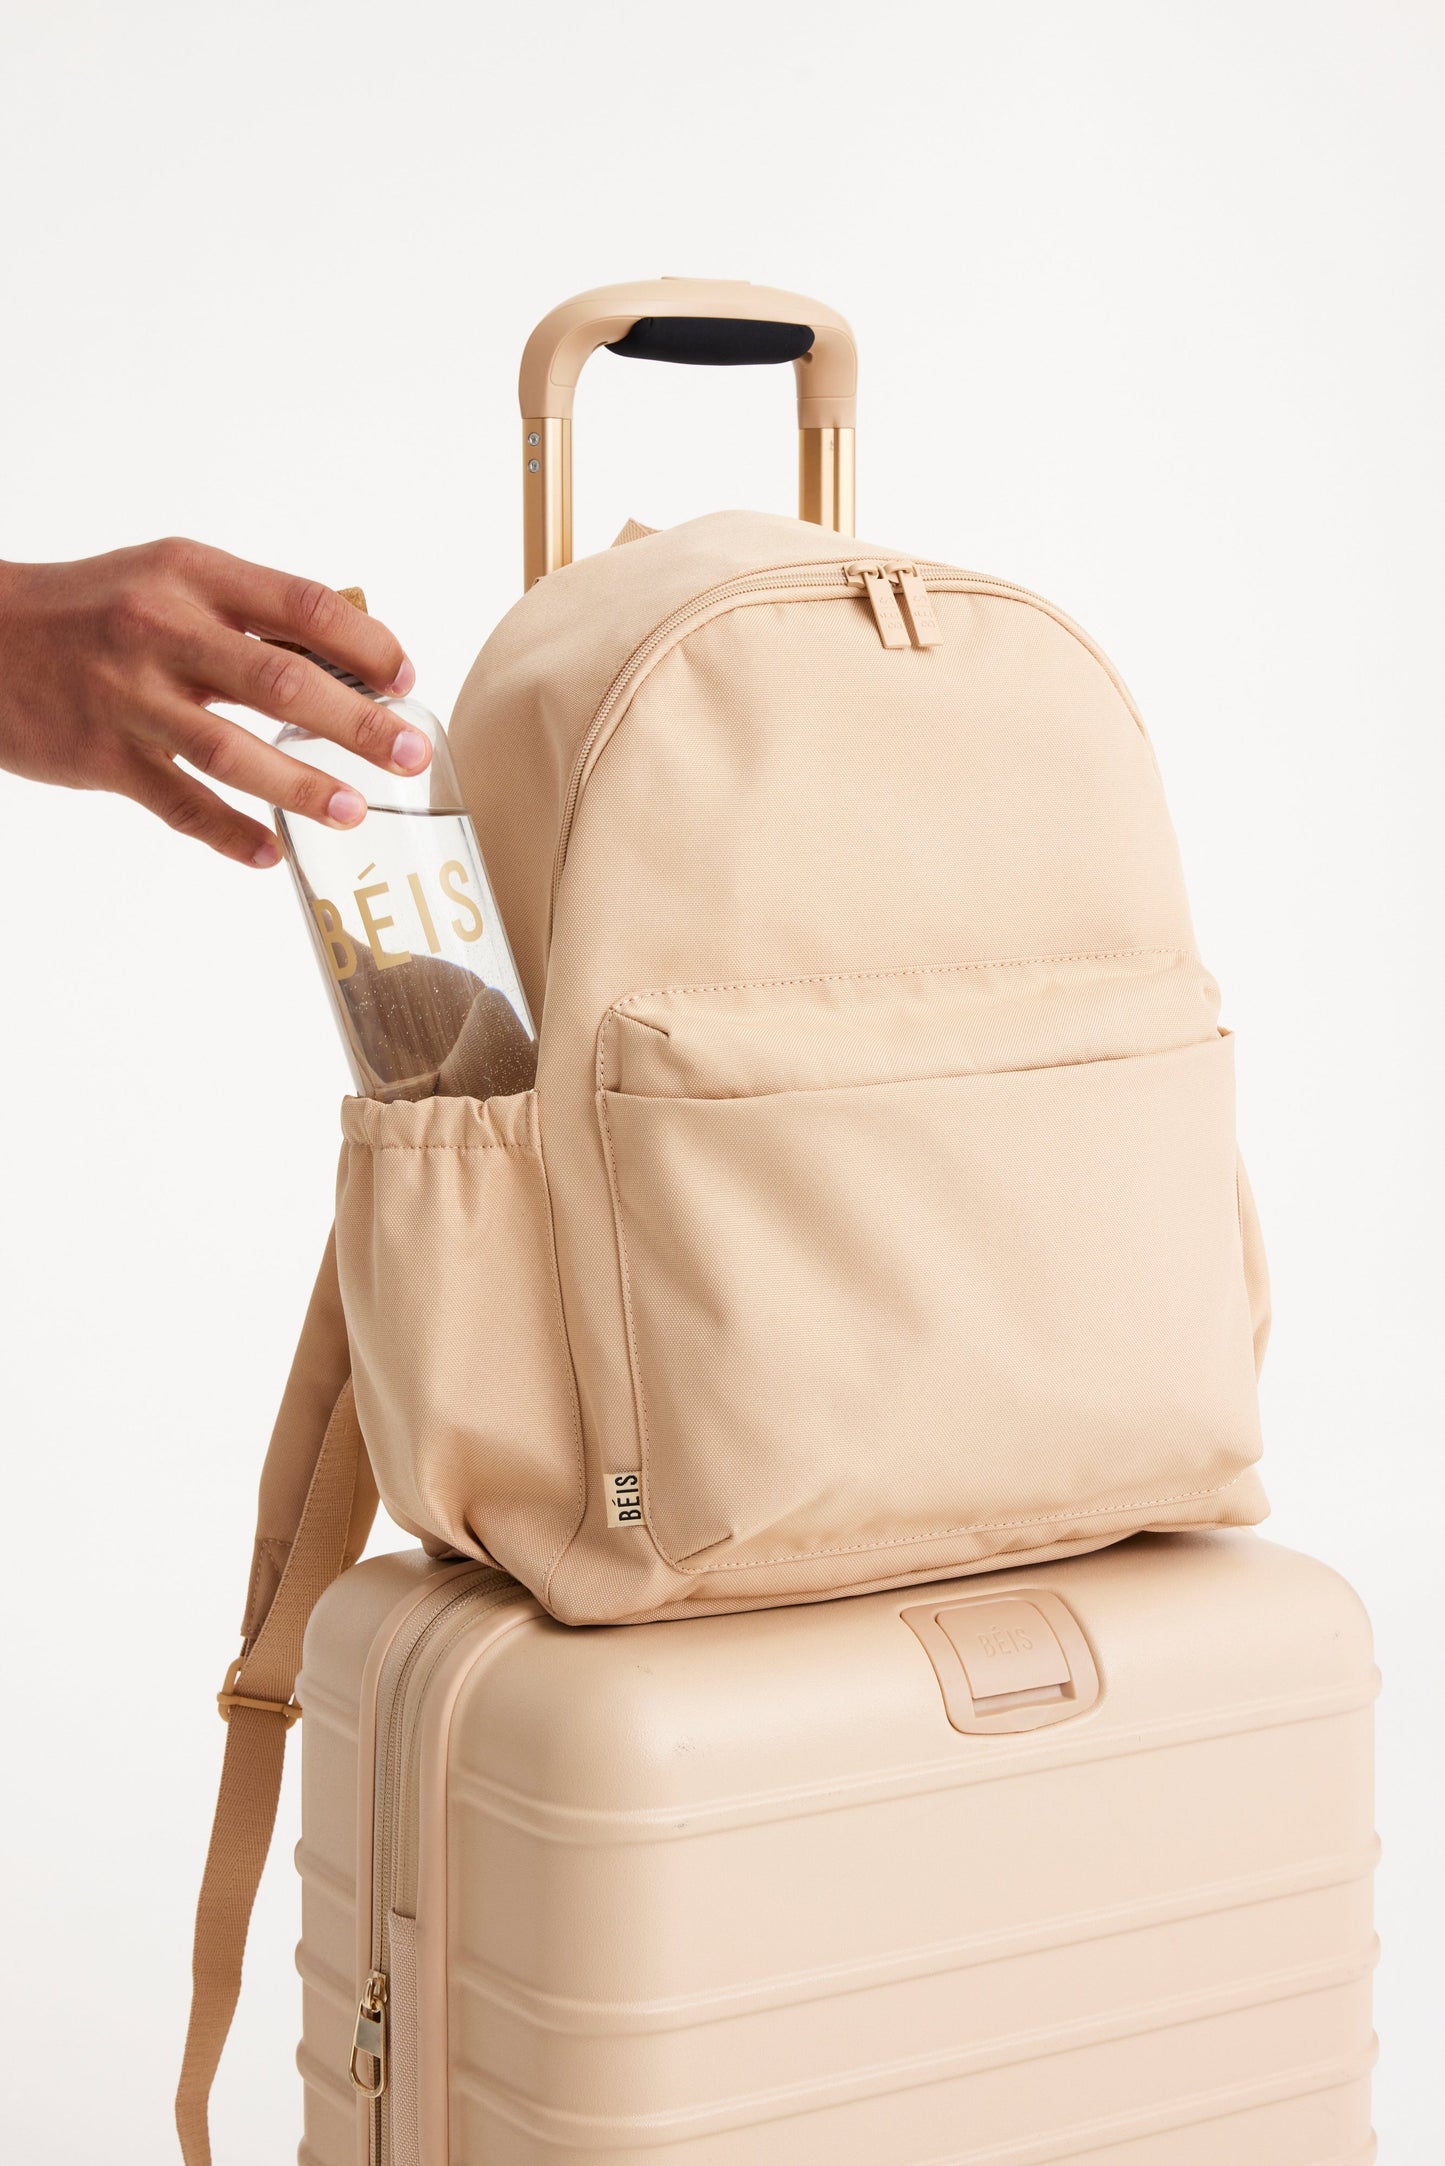 The BÉISics Backpack in Beige